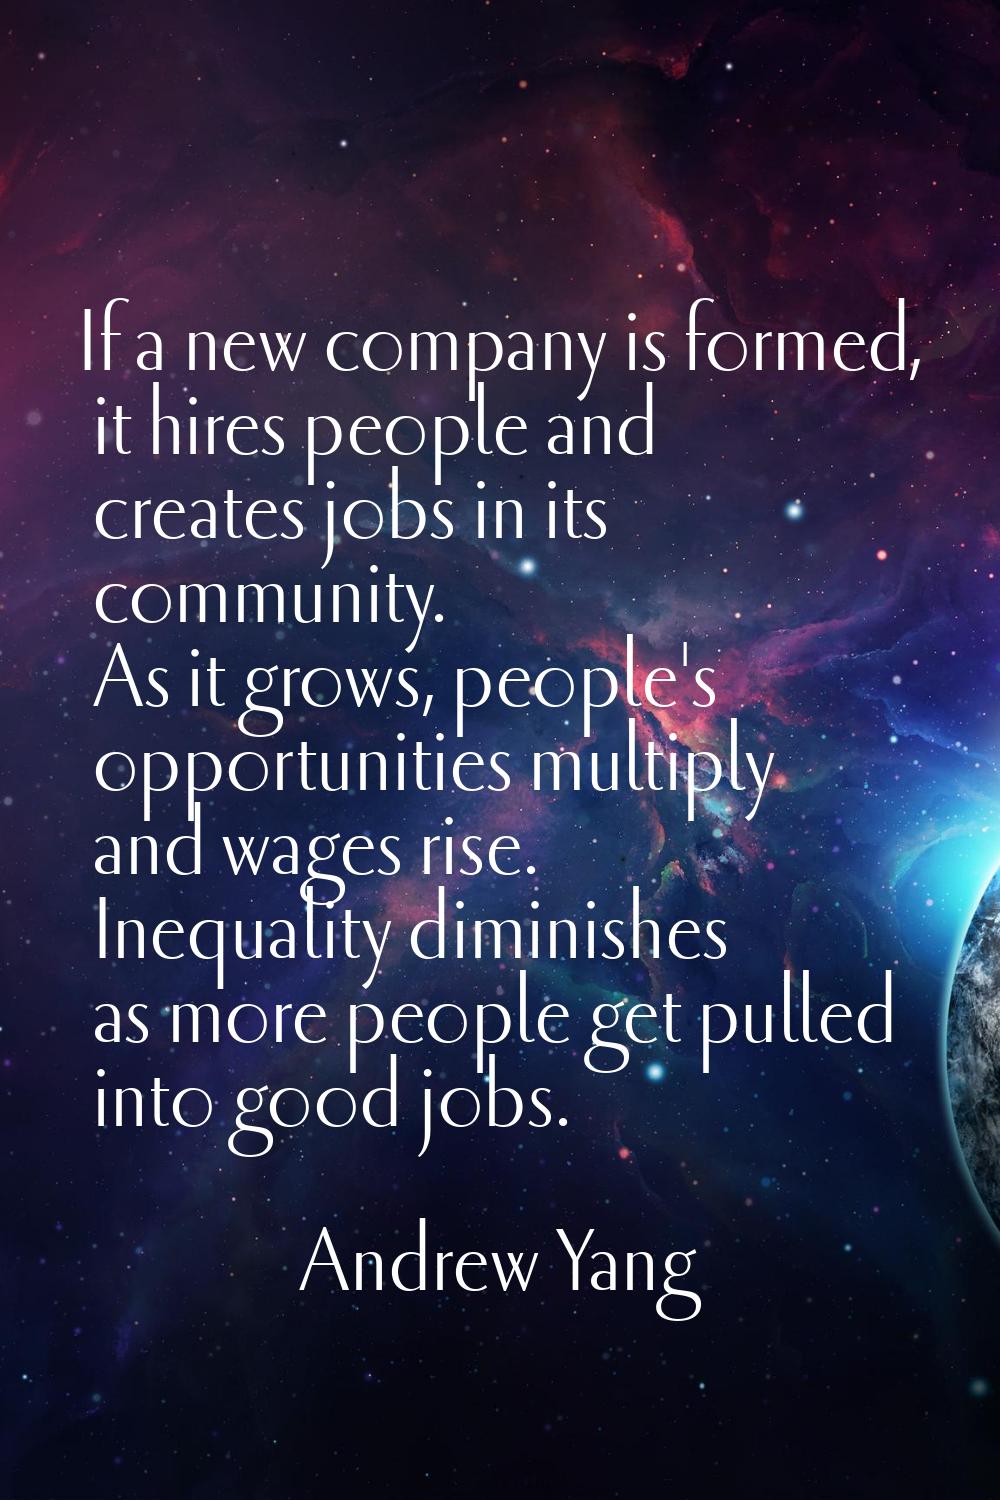 If a new company is formed, it hires people and creates jobs in its community. As it grows, people'